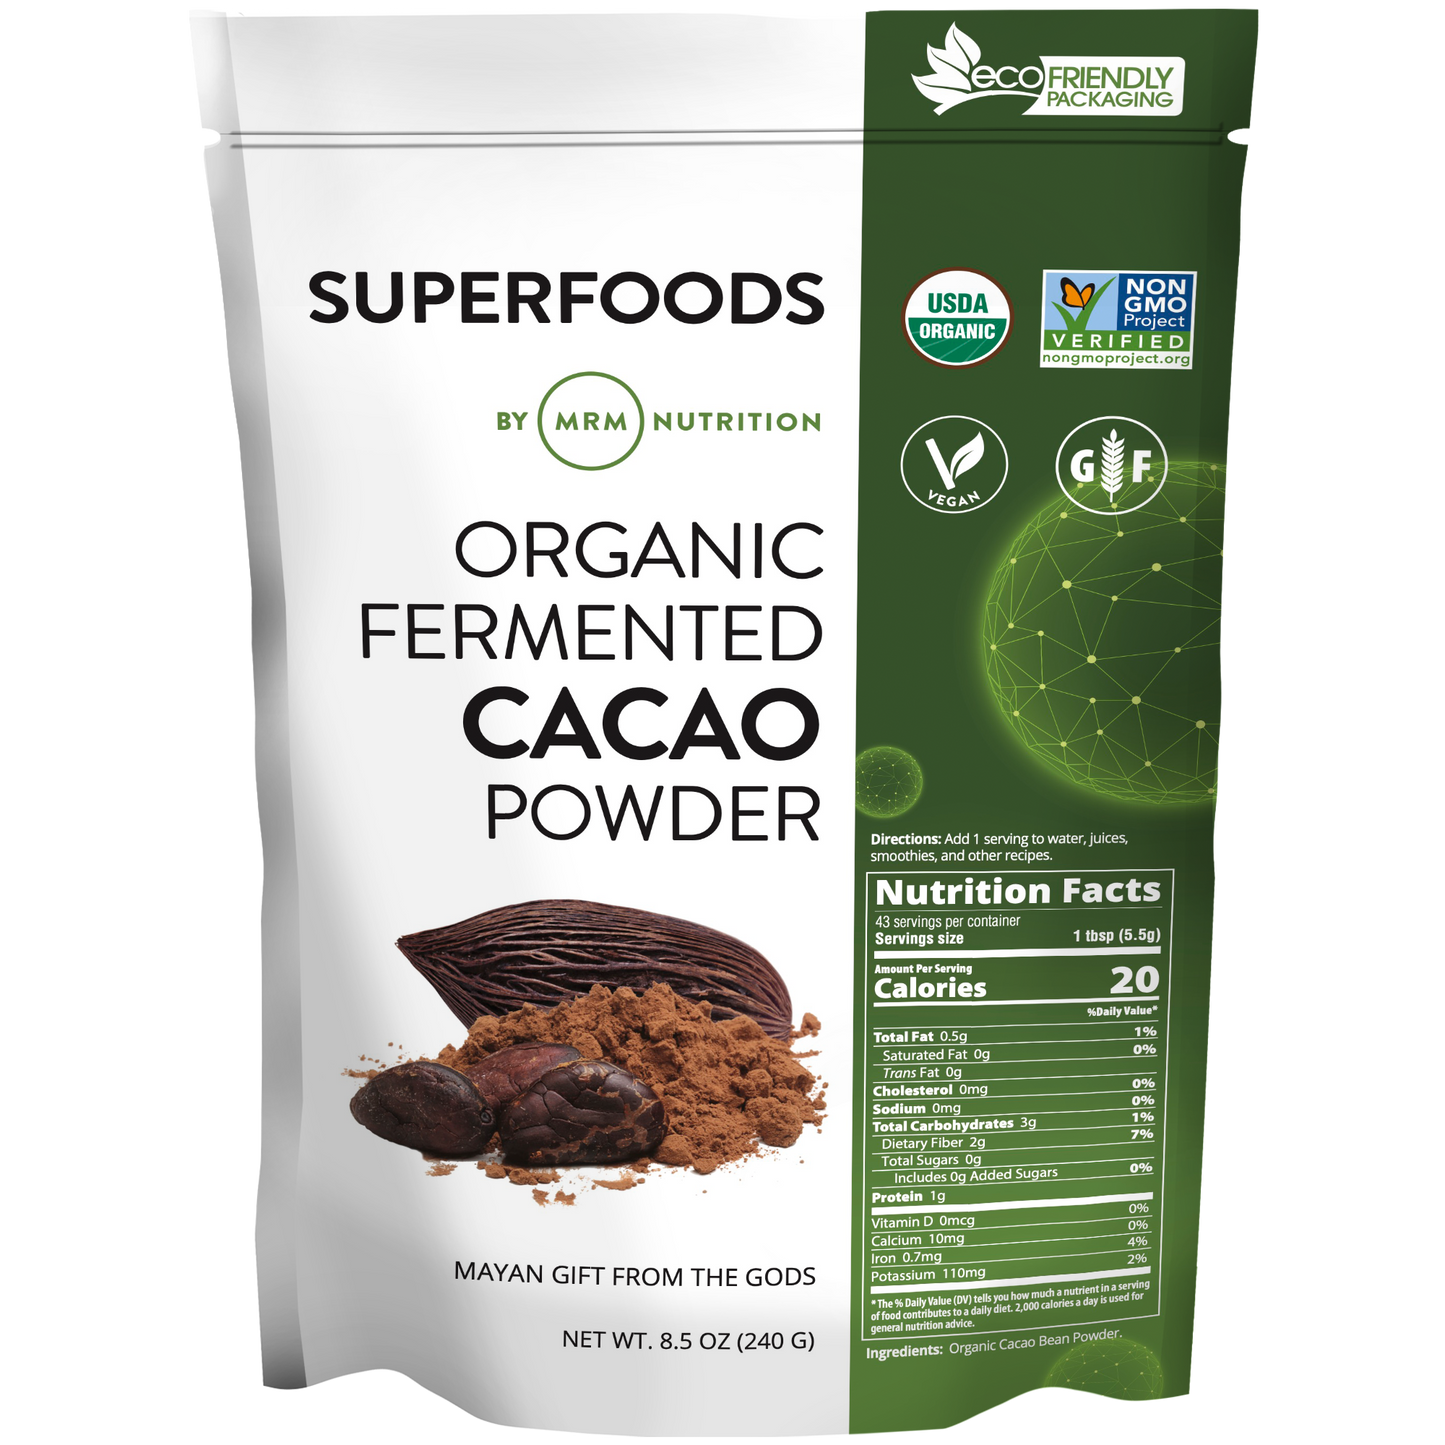 Superfoods - Organic Fermented Cacao Powder